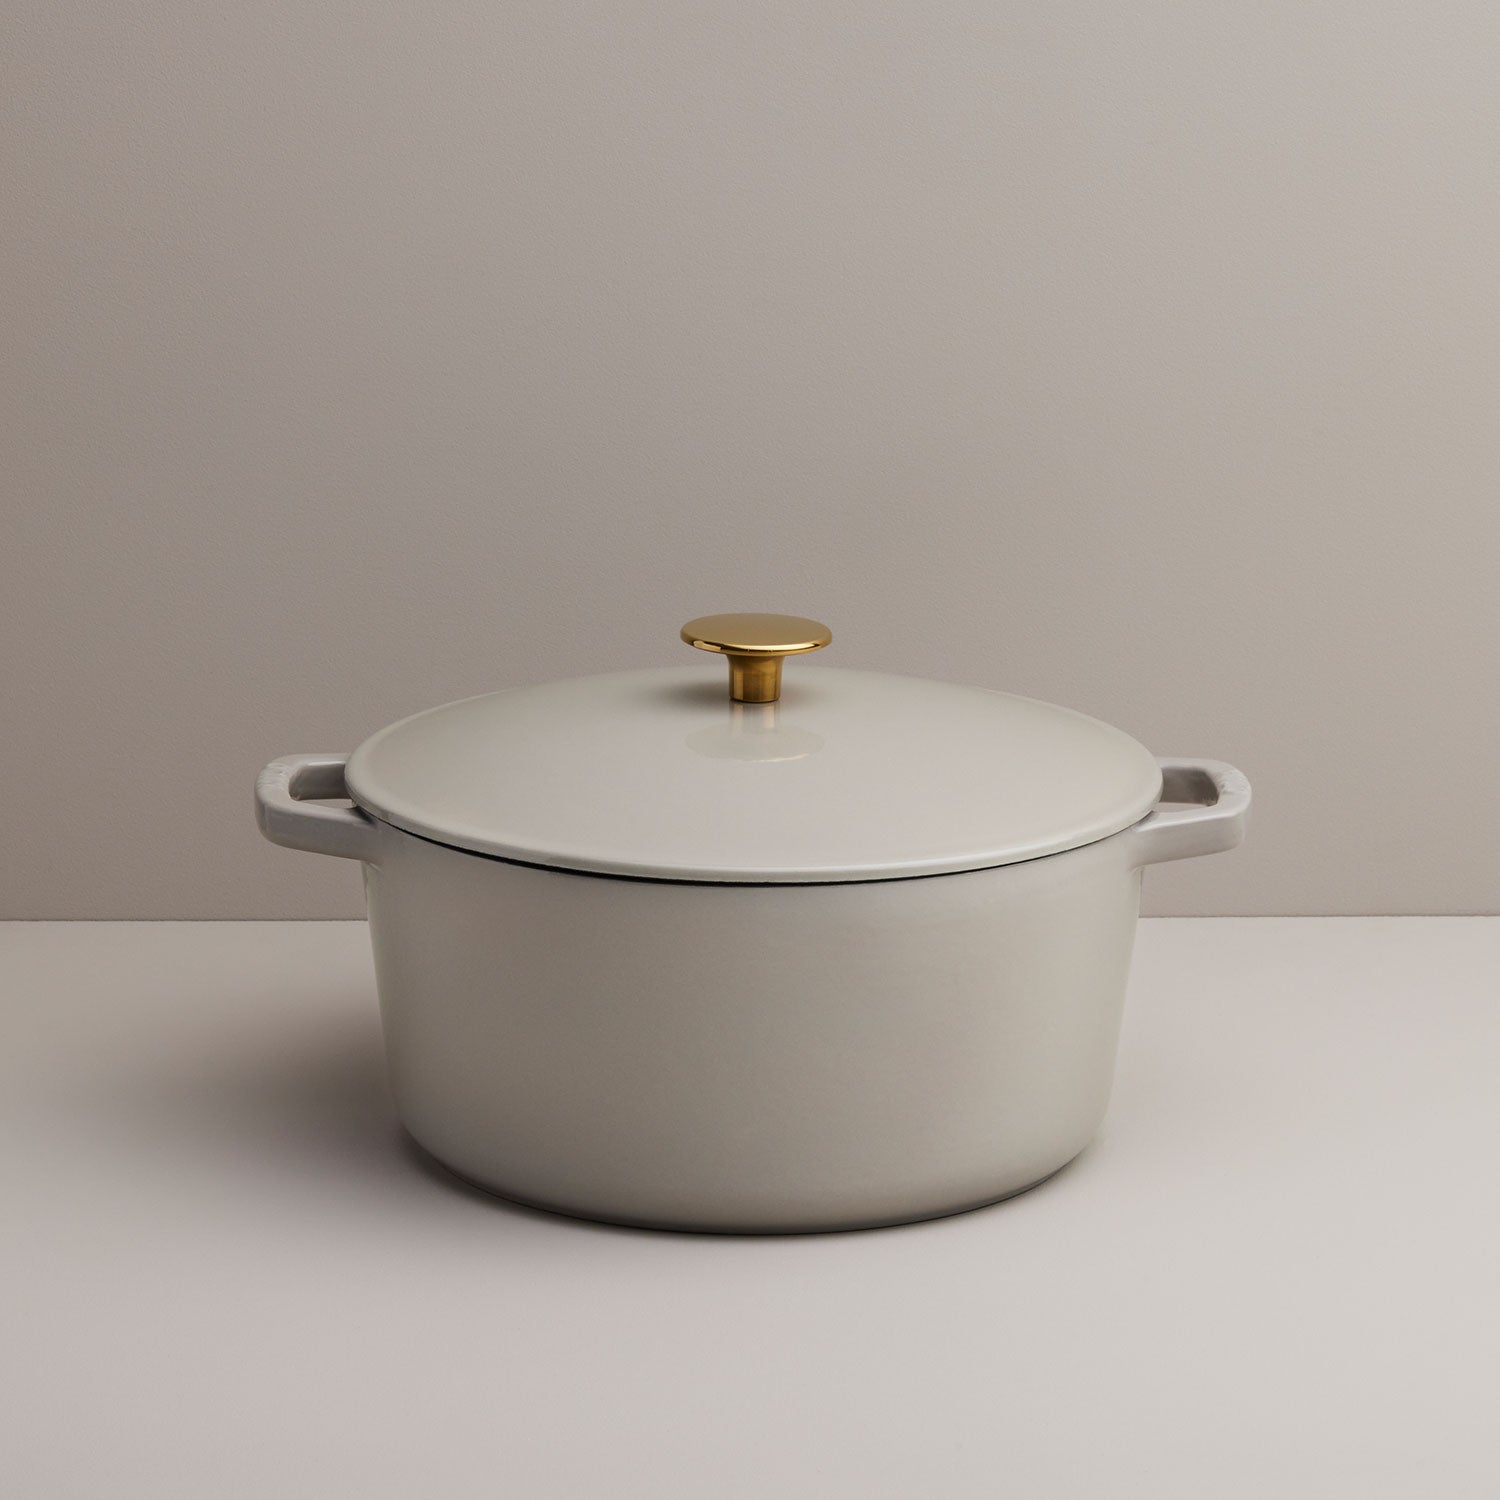 5.5 Quart Enameled Cast Iron Dutch Oven, Cookware 12.81 x 12.00 x 7.80  Inches